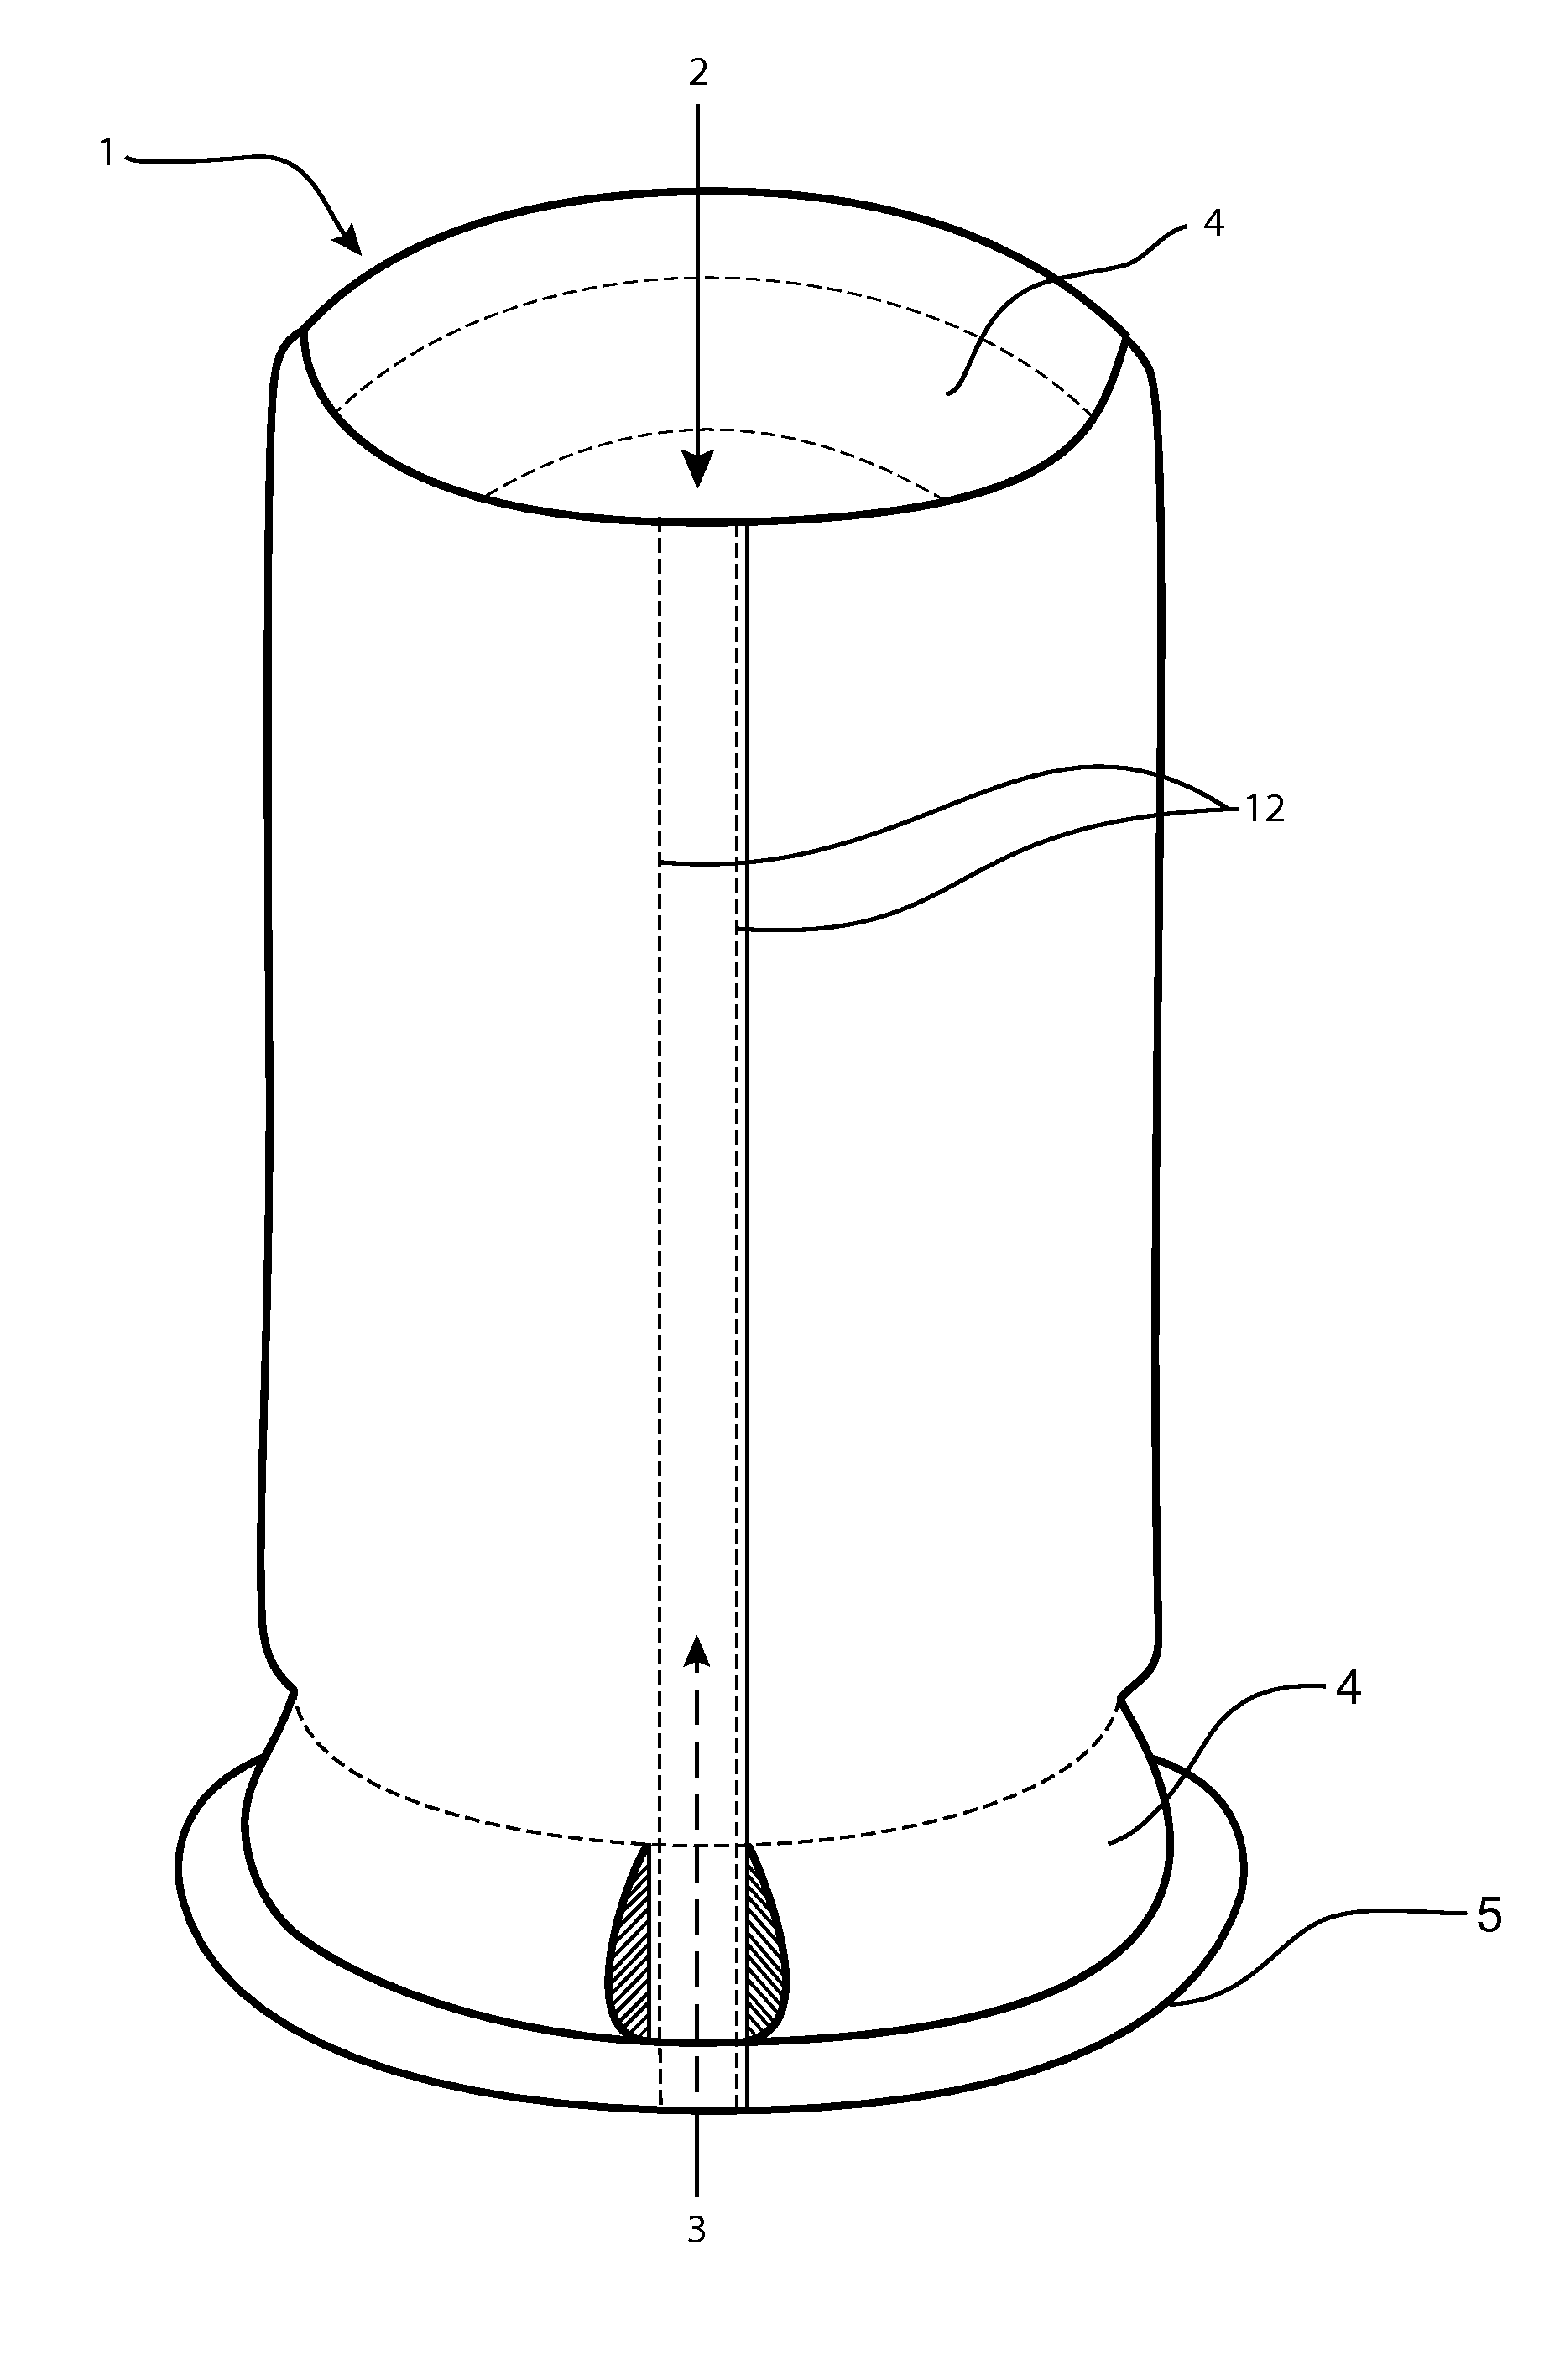 Filter Sleeve for Enabling Waste Water Discharge Directly into the Environment